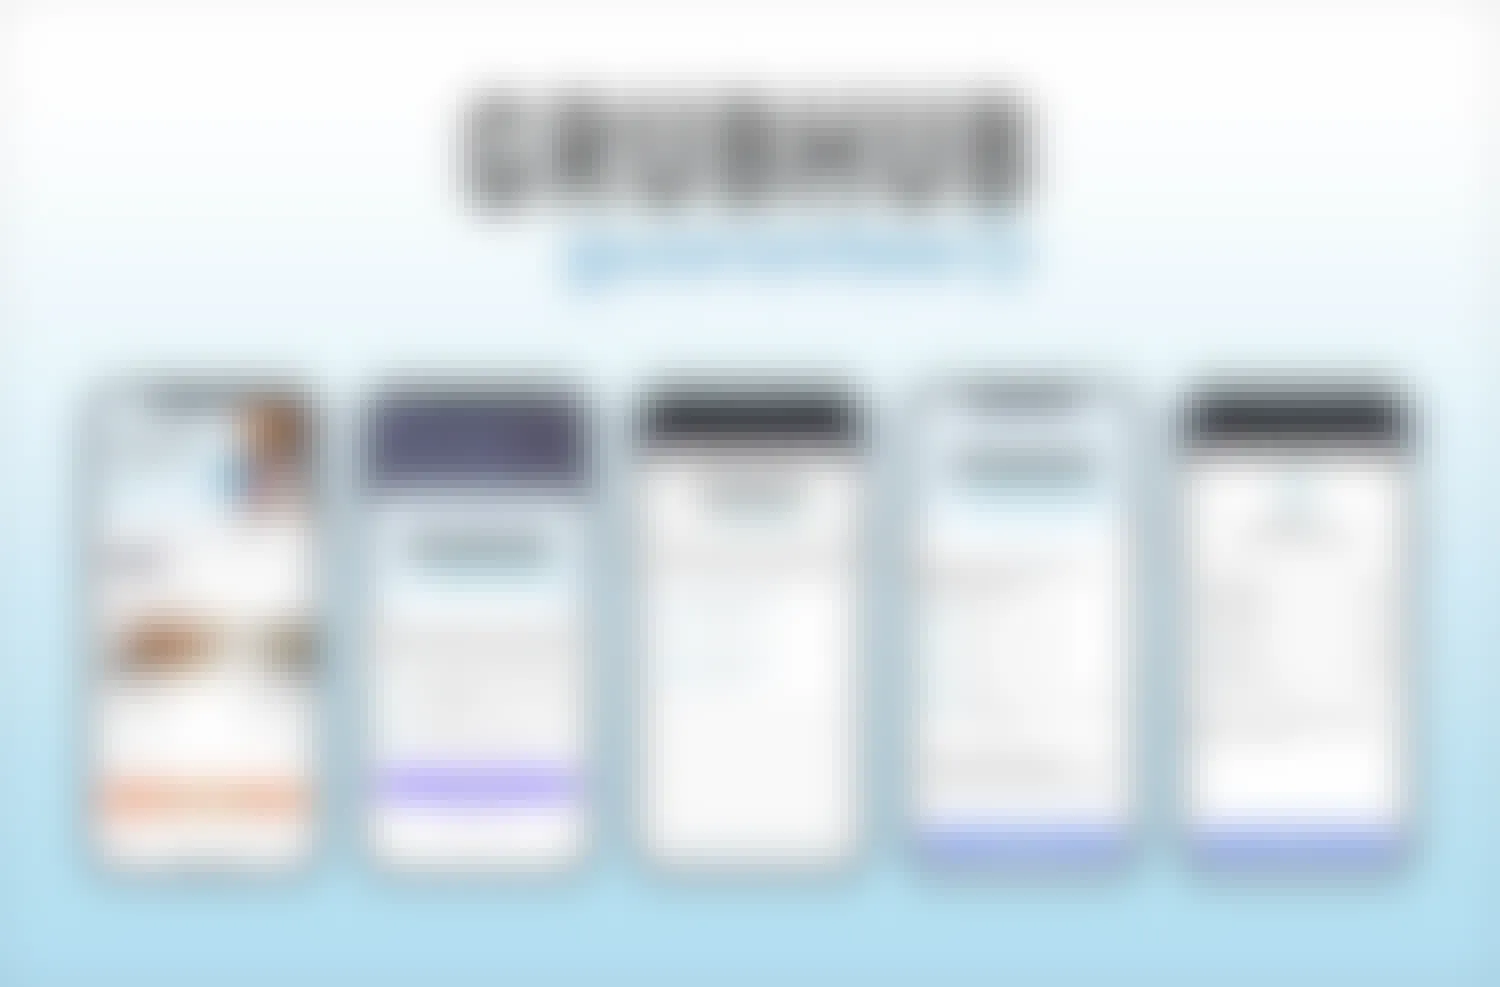 A layout of five phones showing the Grubhub Guarantee